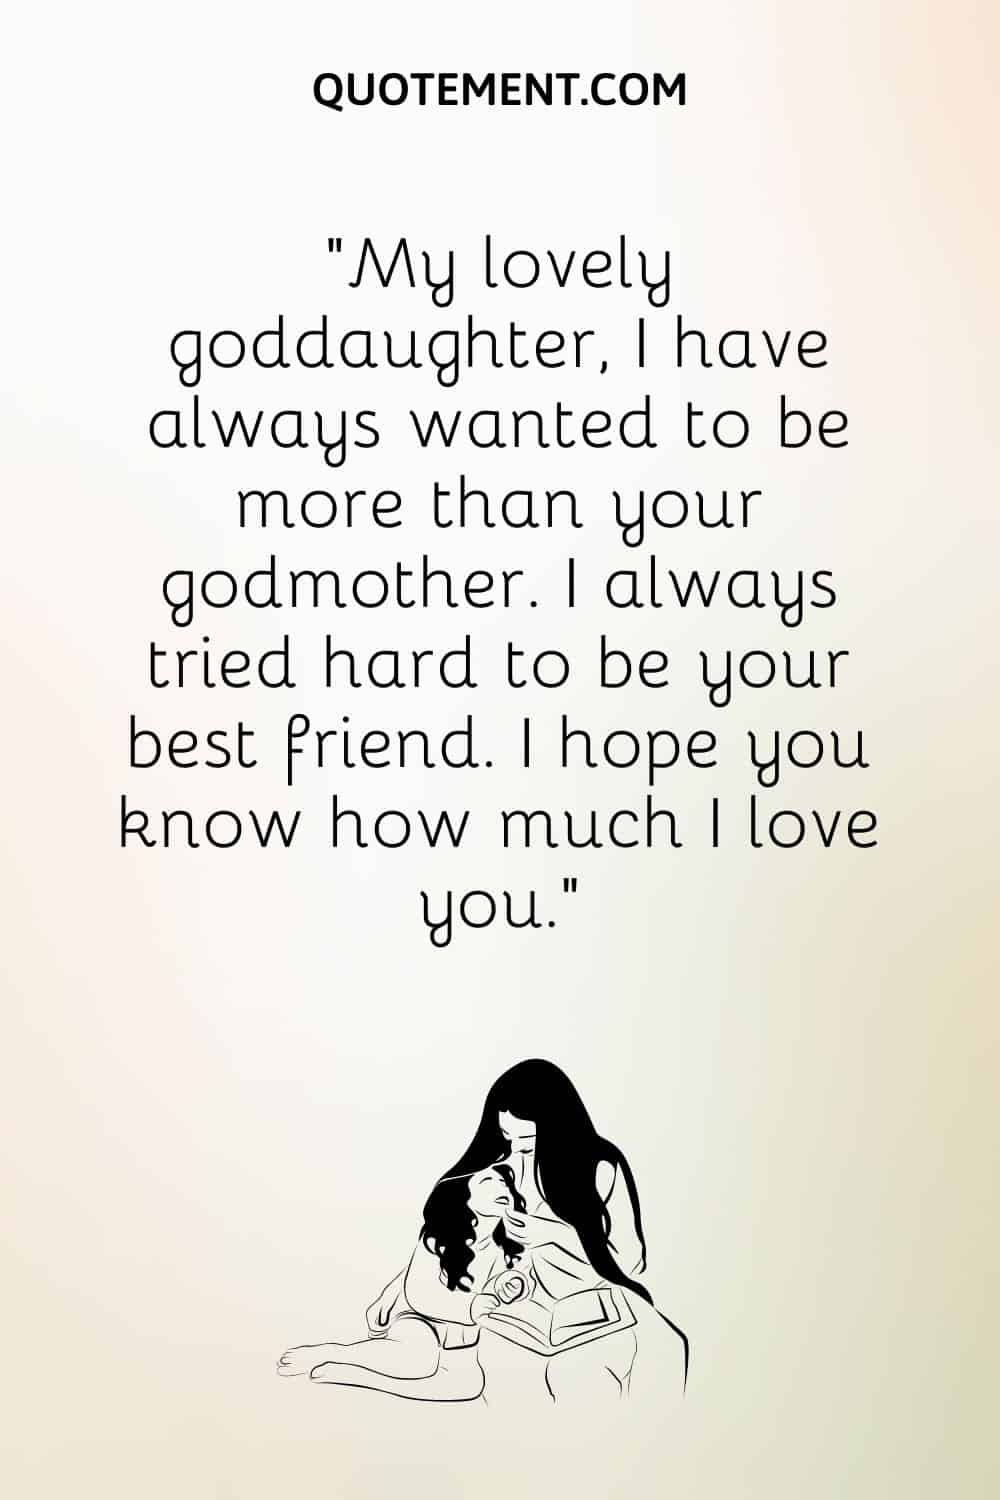 Illustration of goddaughter and godmother and best goddaughter quote.